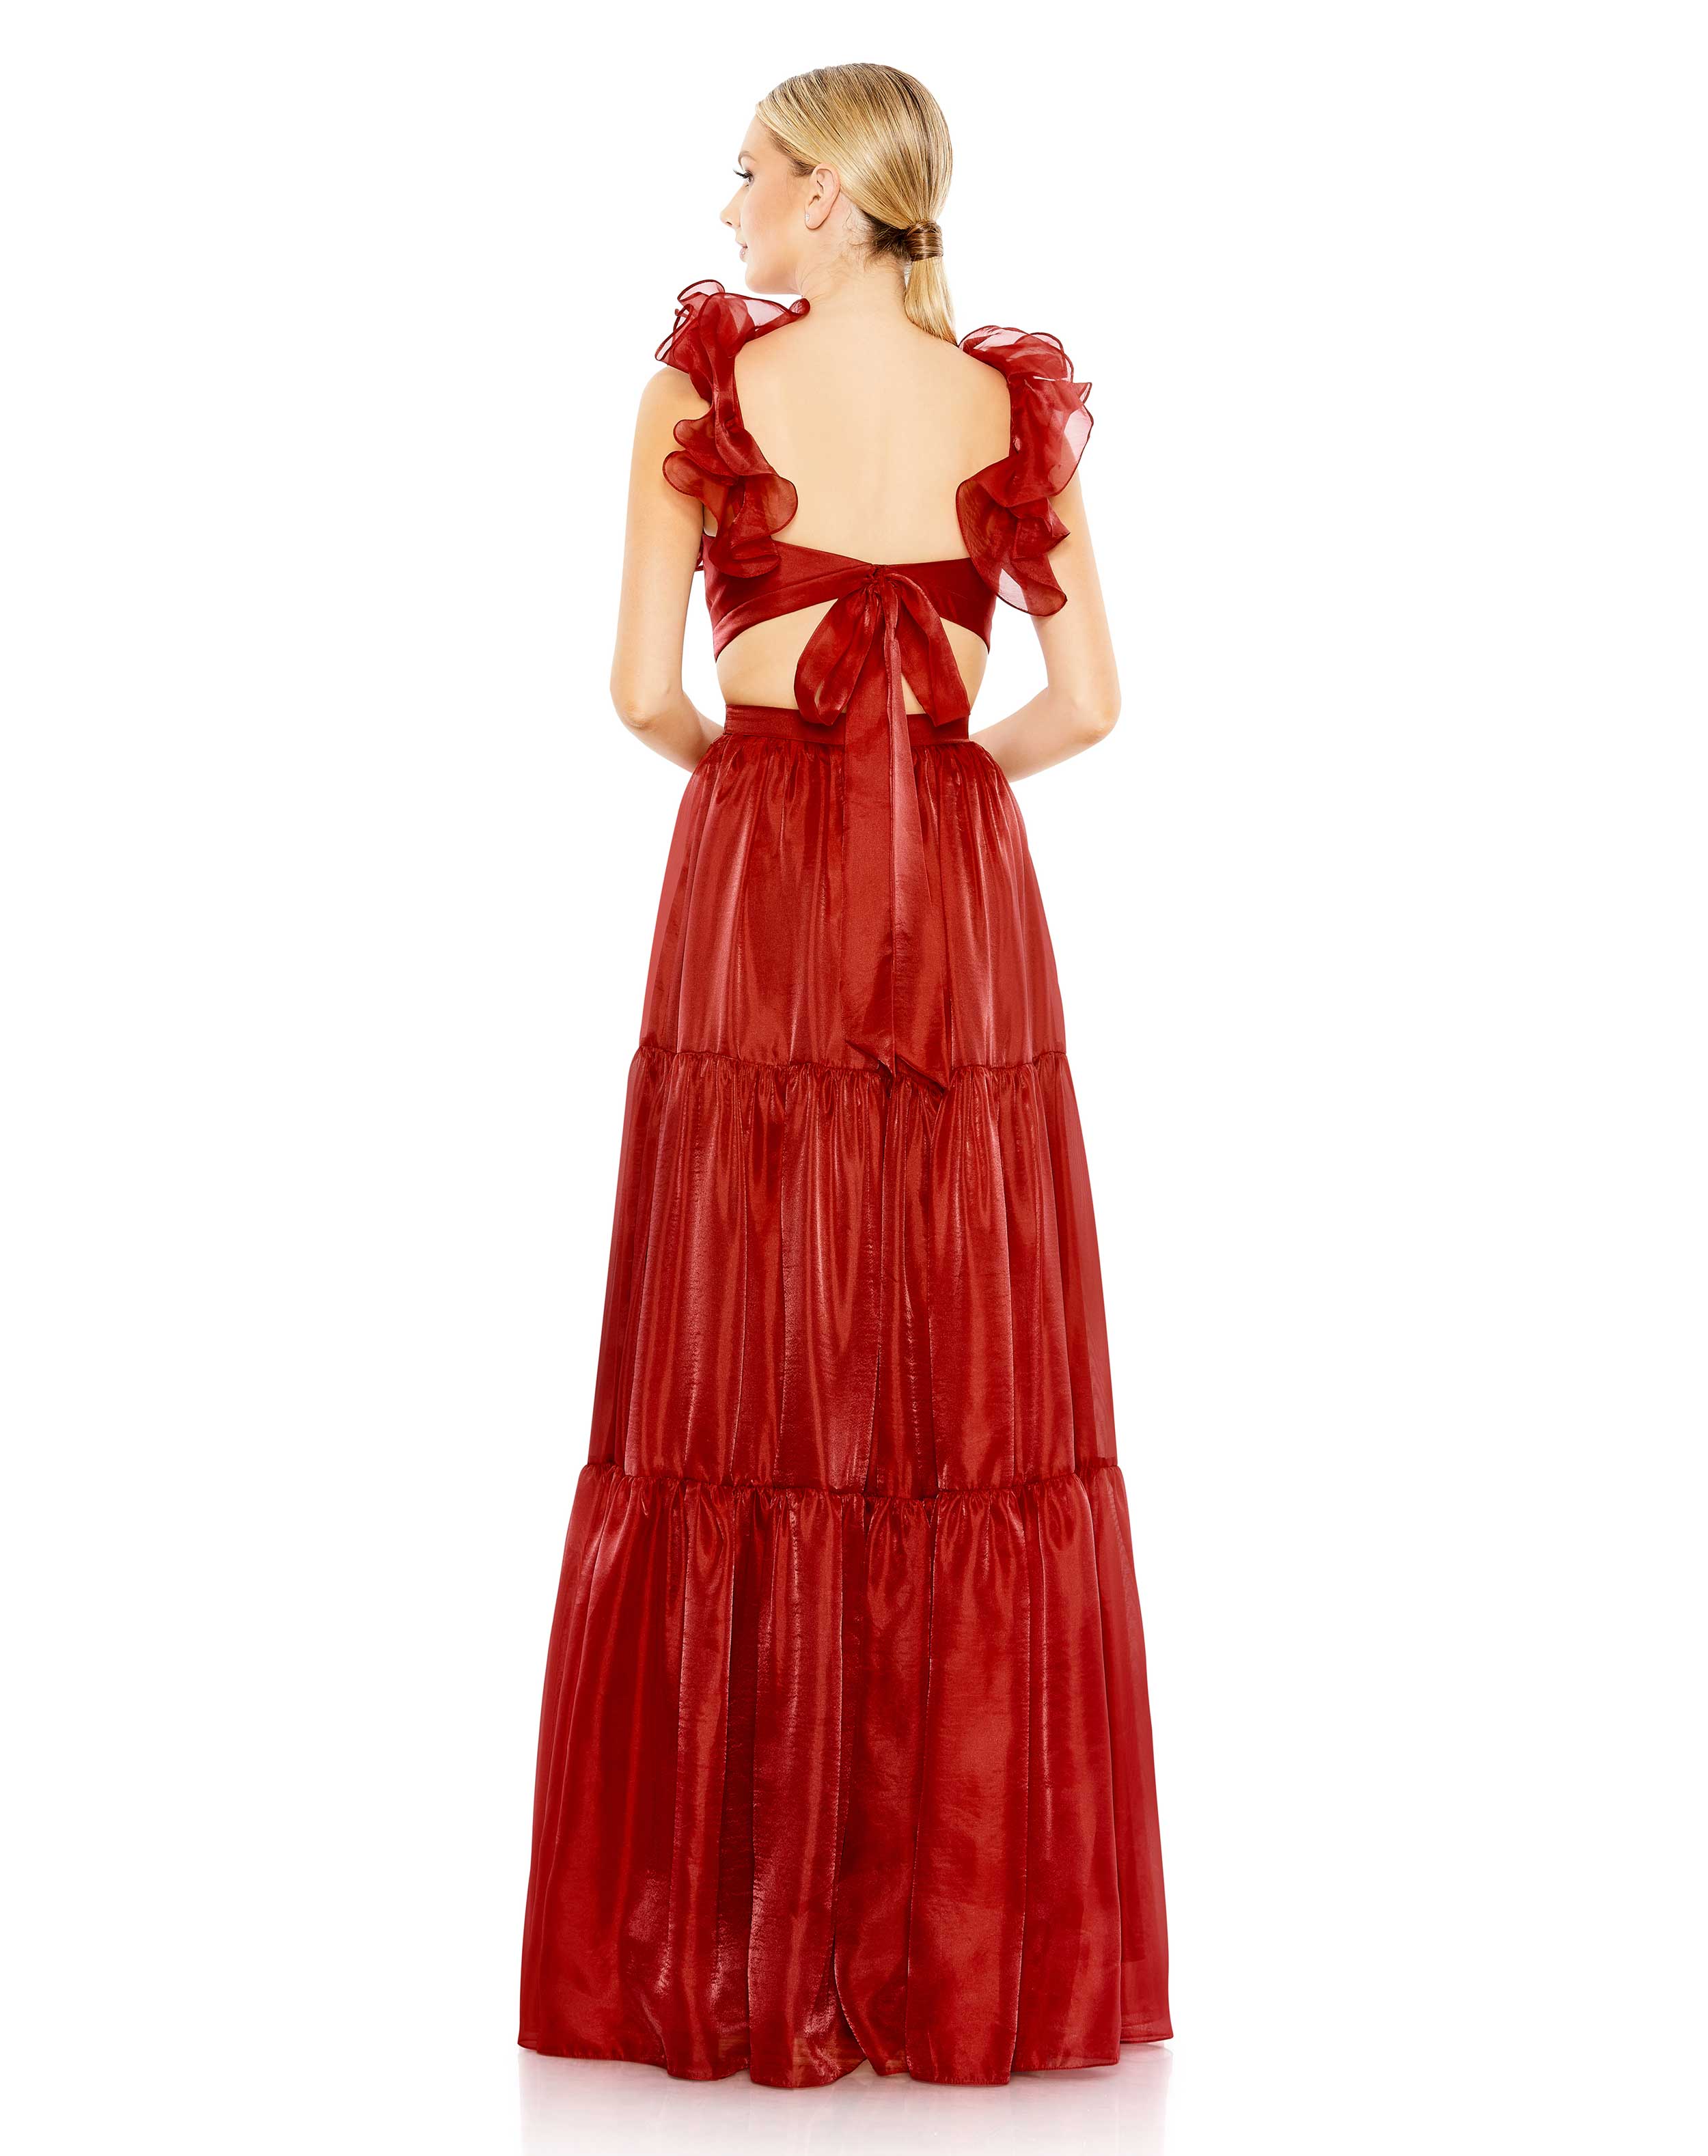 Ruffled Shoulder Cut Out Soft Tie Back Tiered Gown